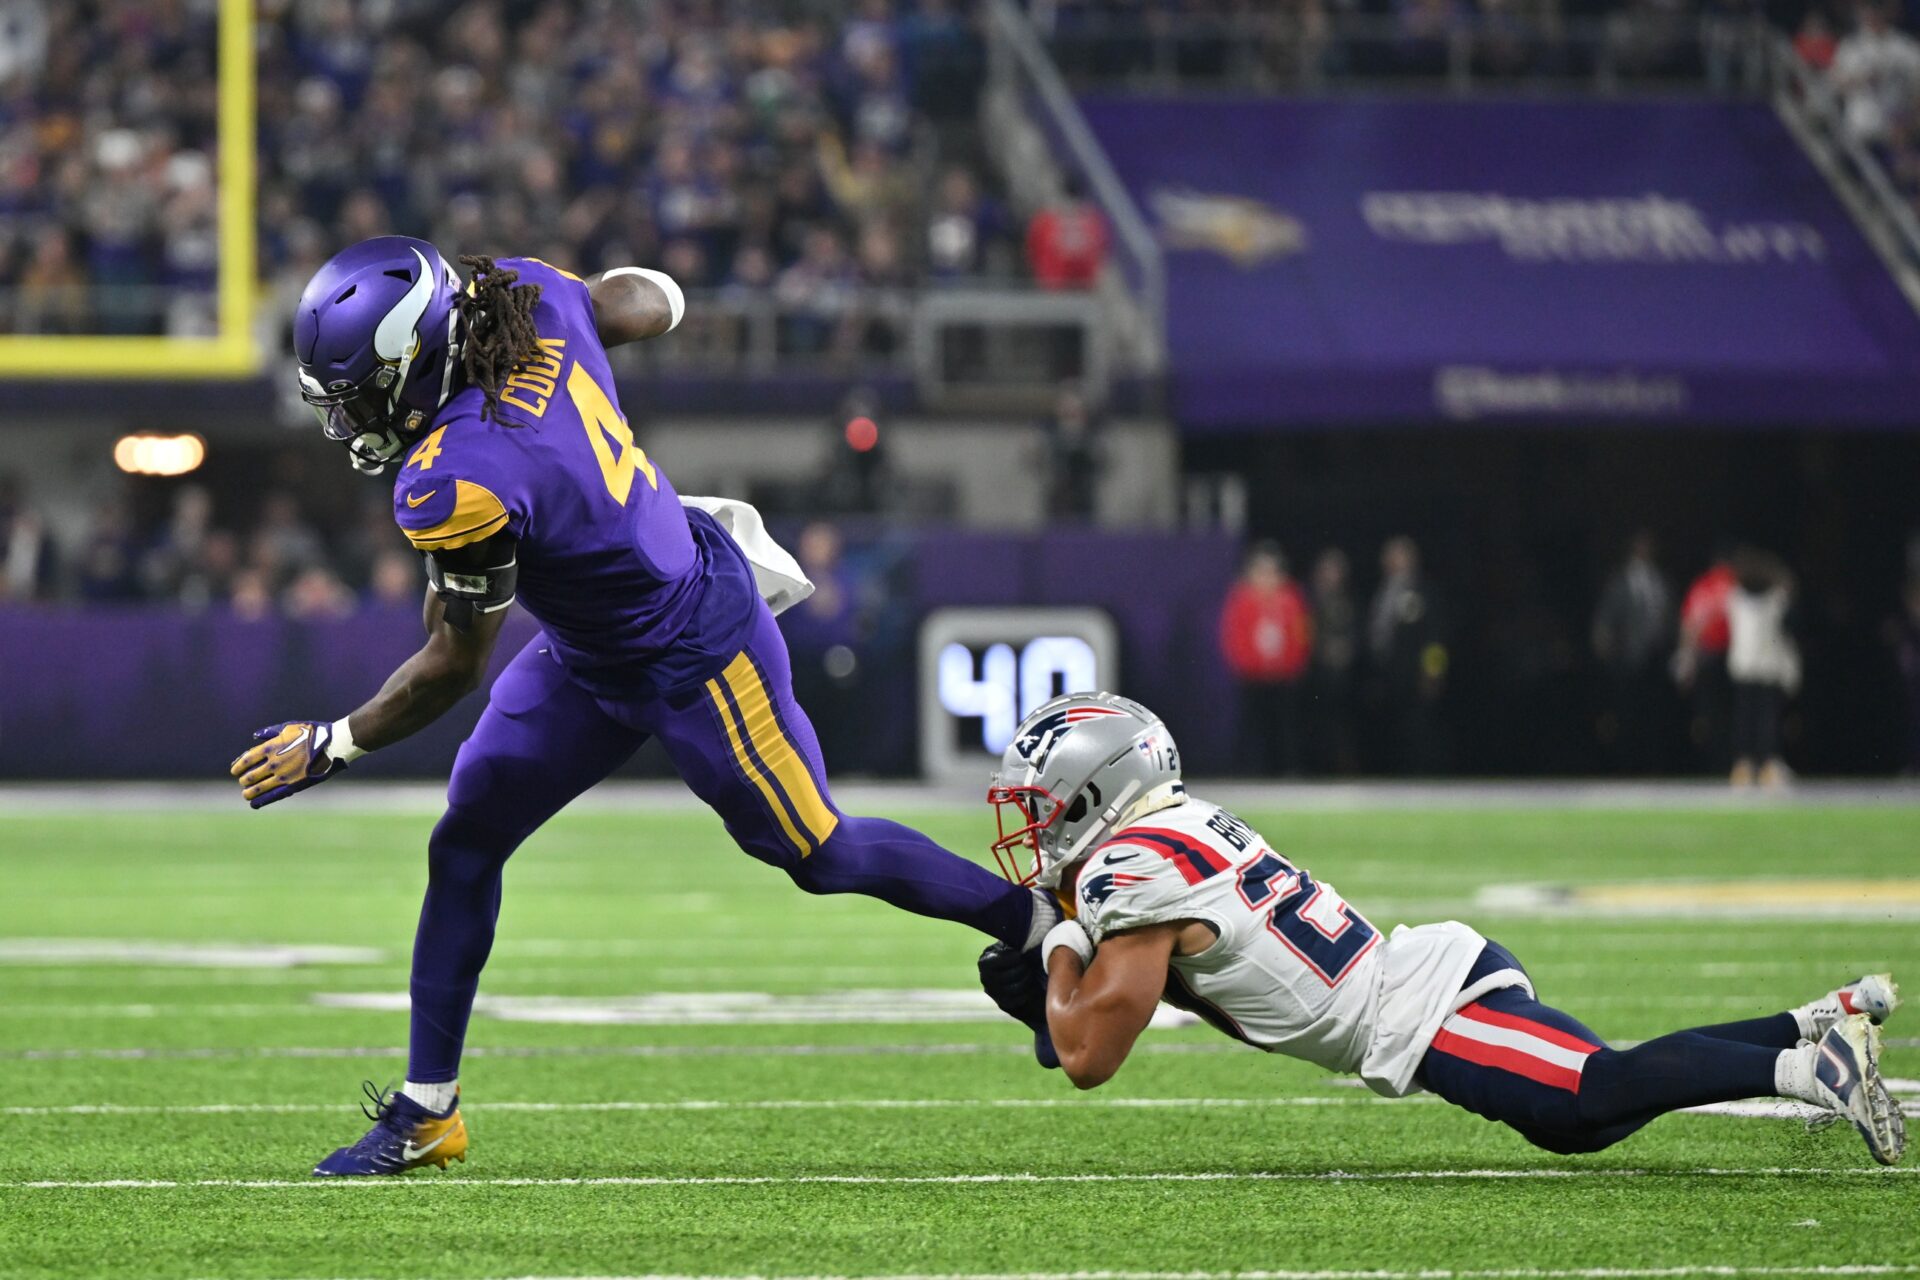 Minnesota Vikings RB Dalvin Cook (4) gets tackled by New England Patriots CB Myles Bryant (27).